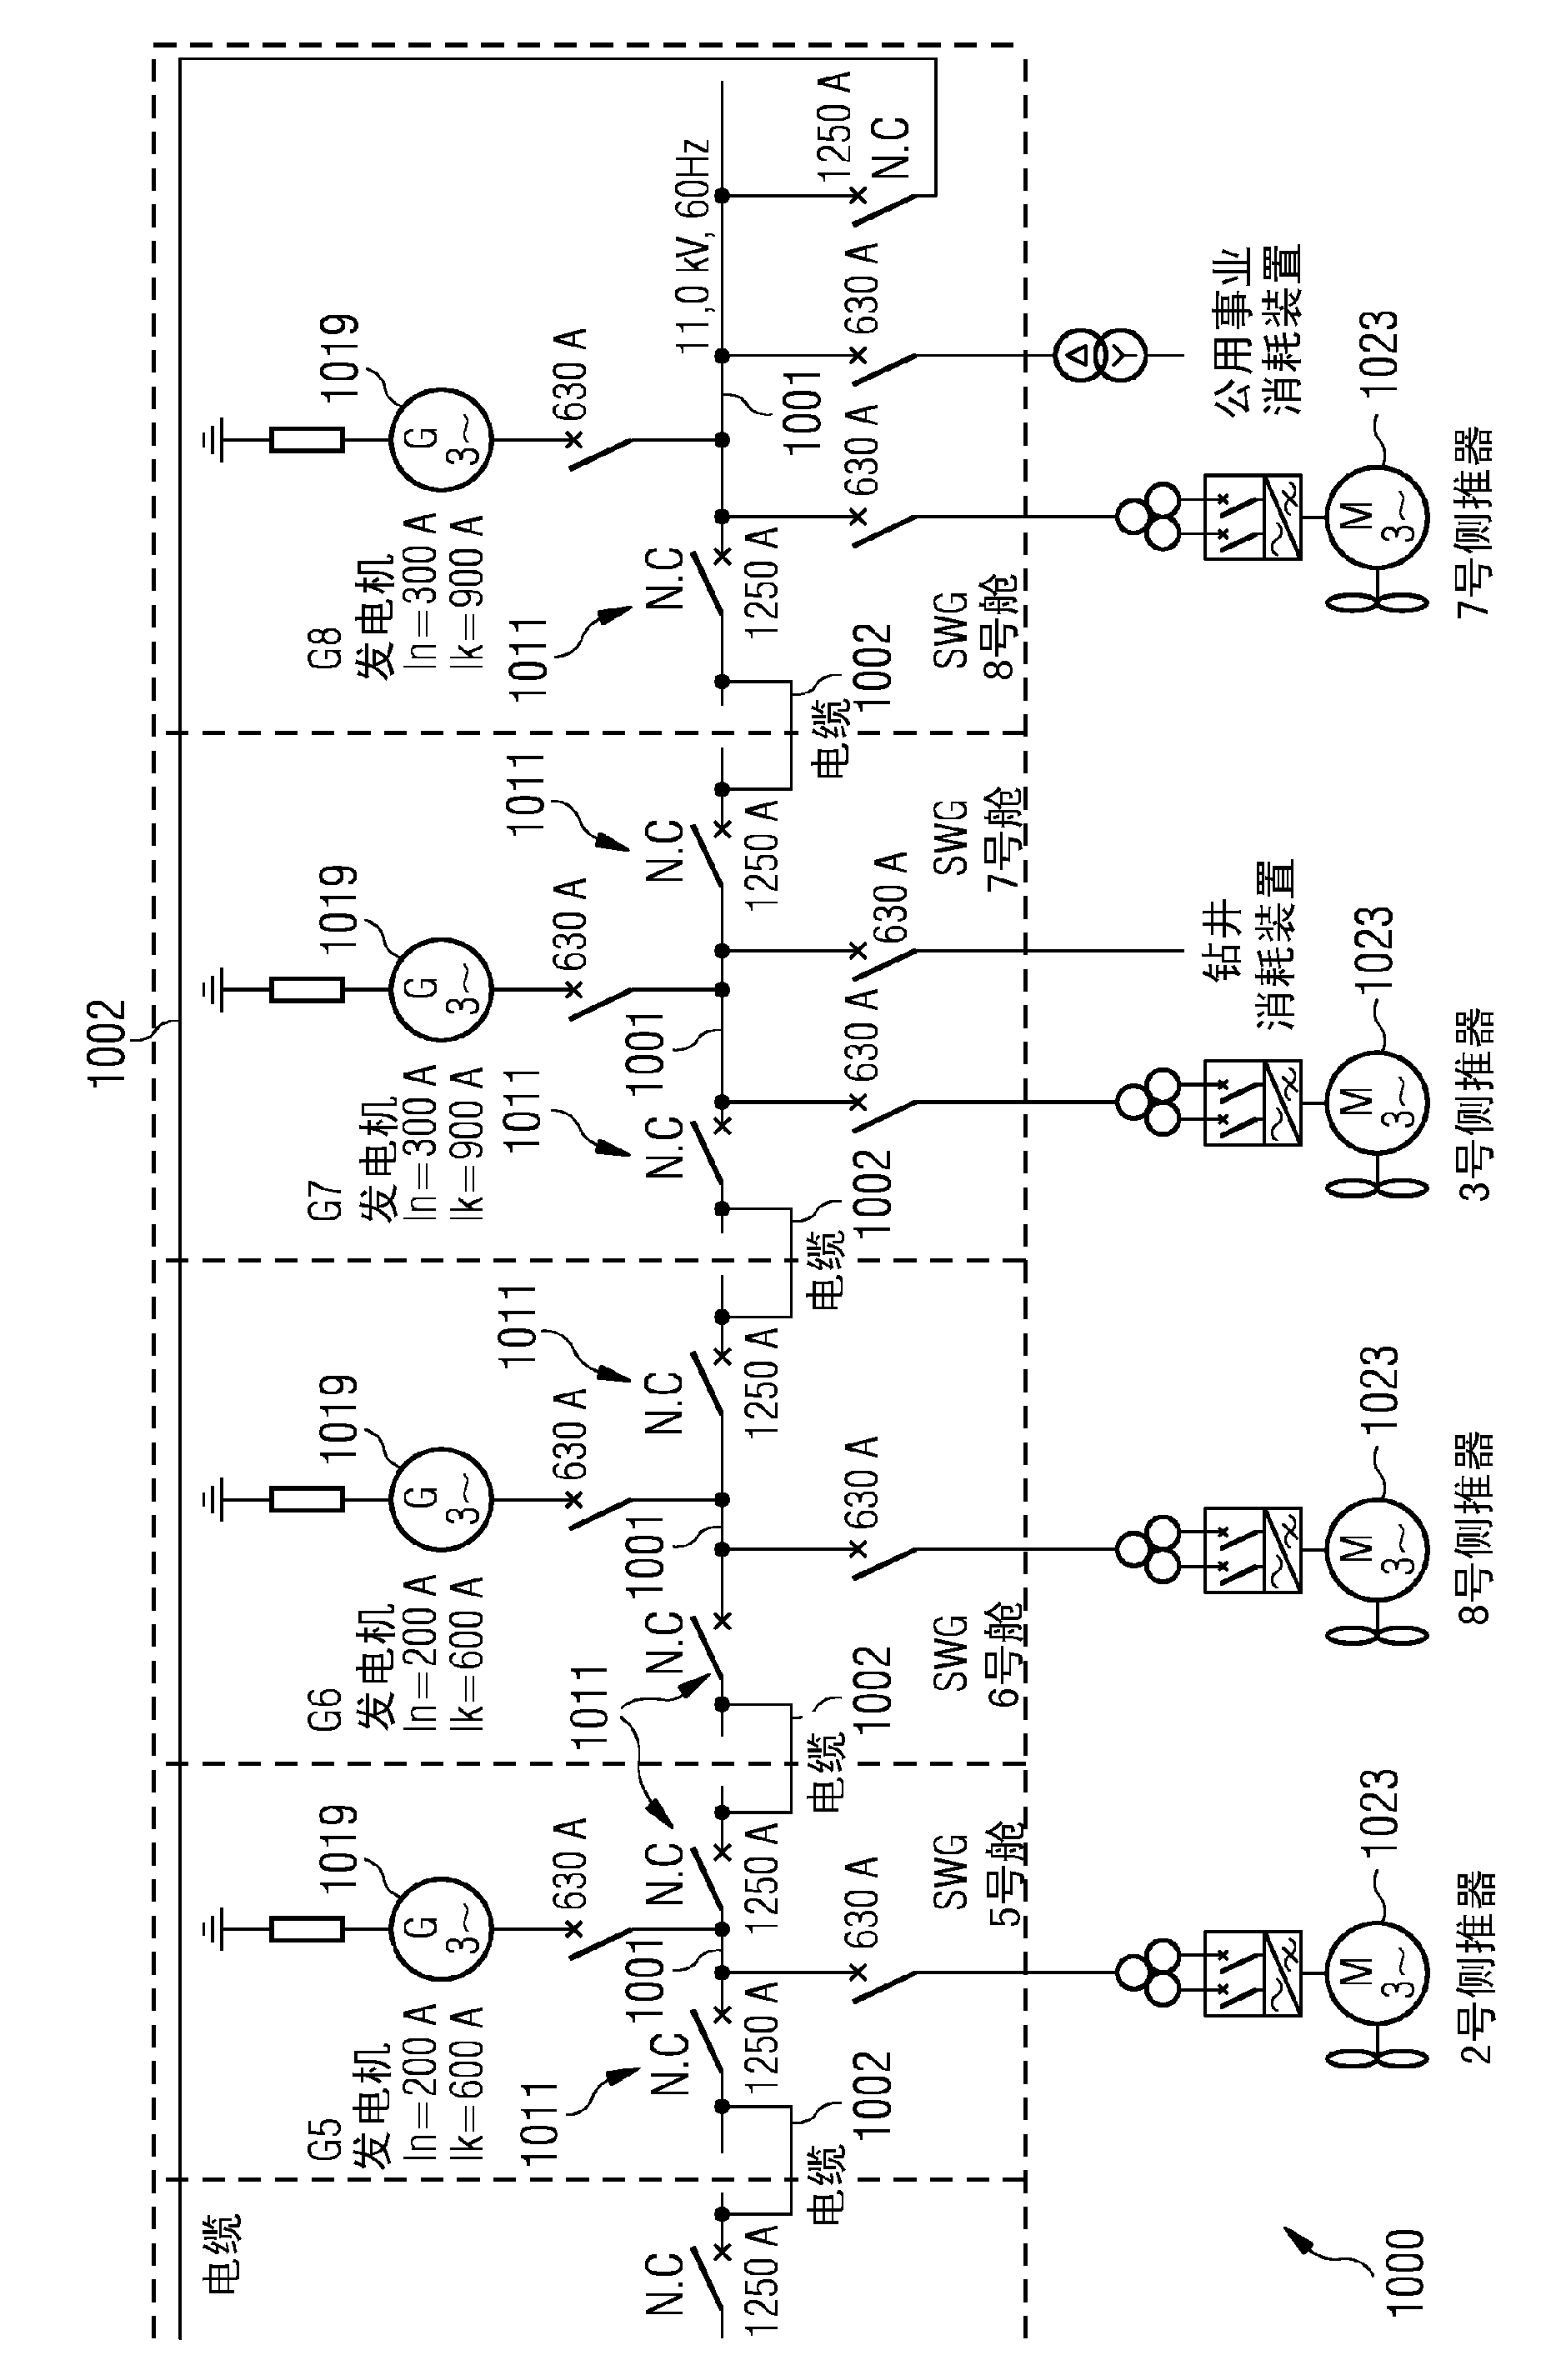 Protection system for electrical power distribution system using directional current detection and logic within protective relays